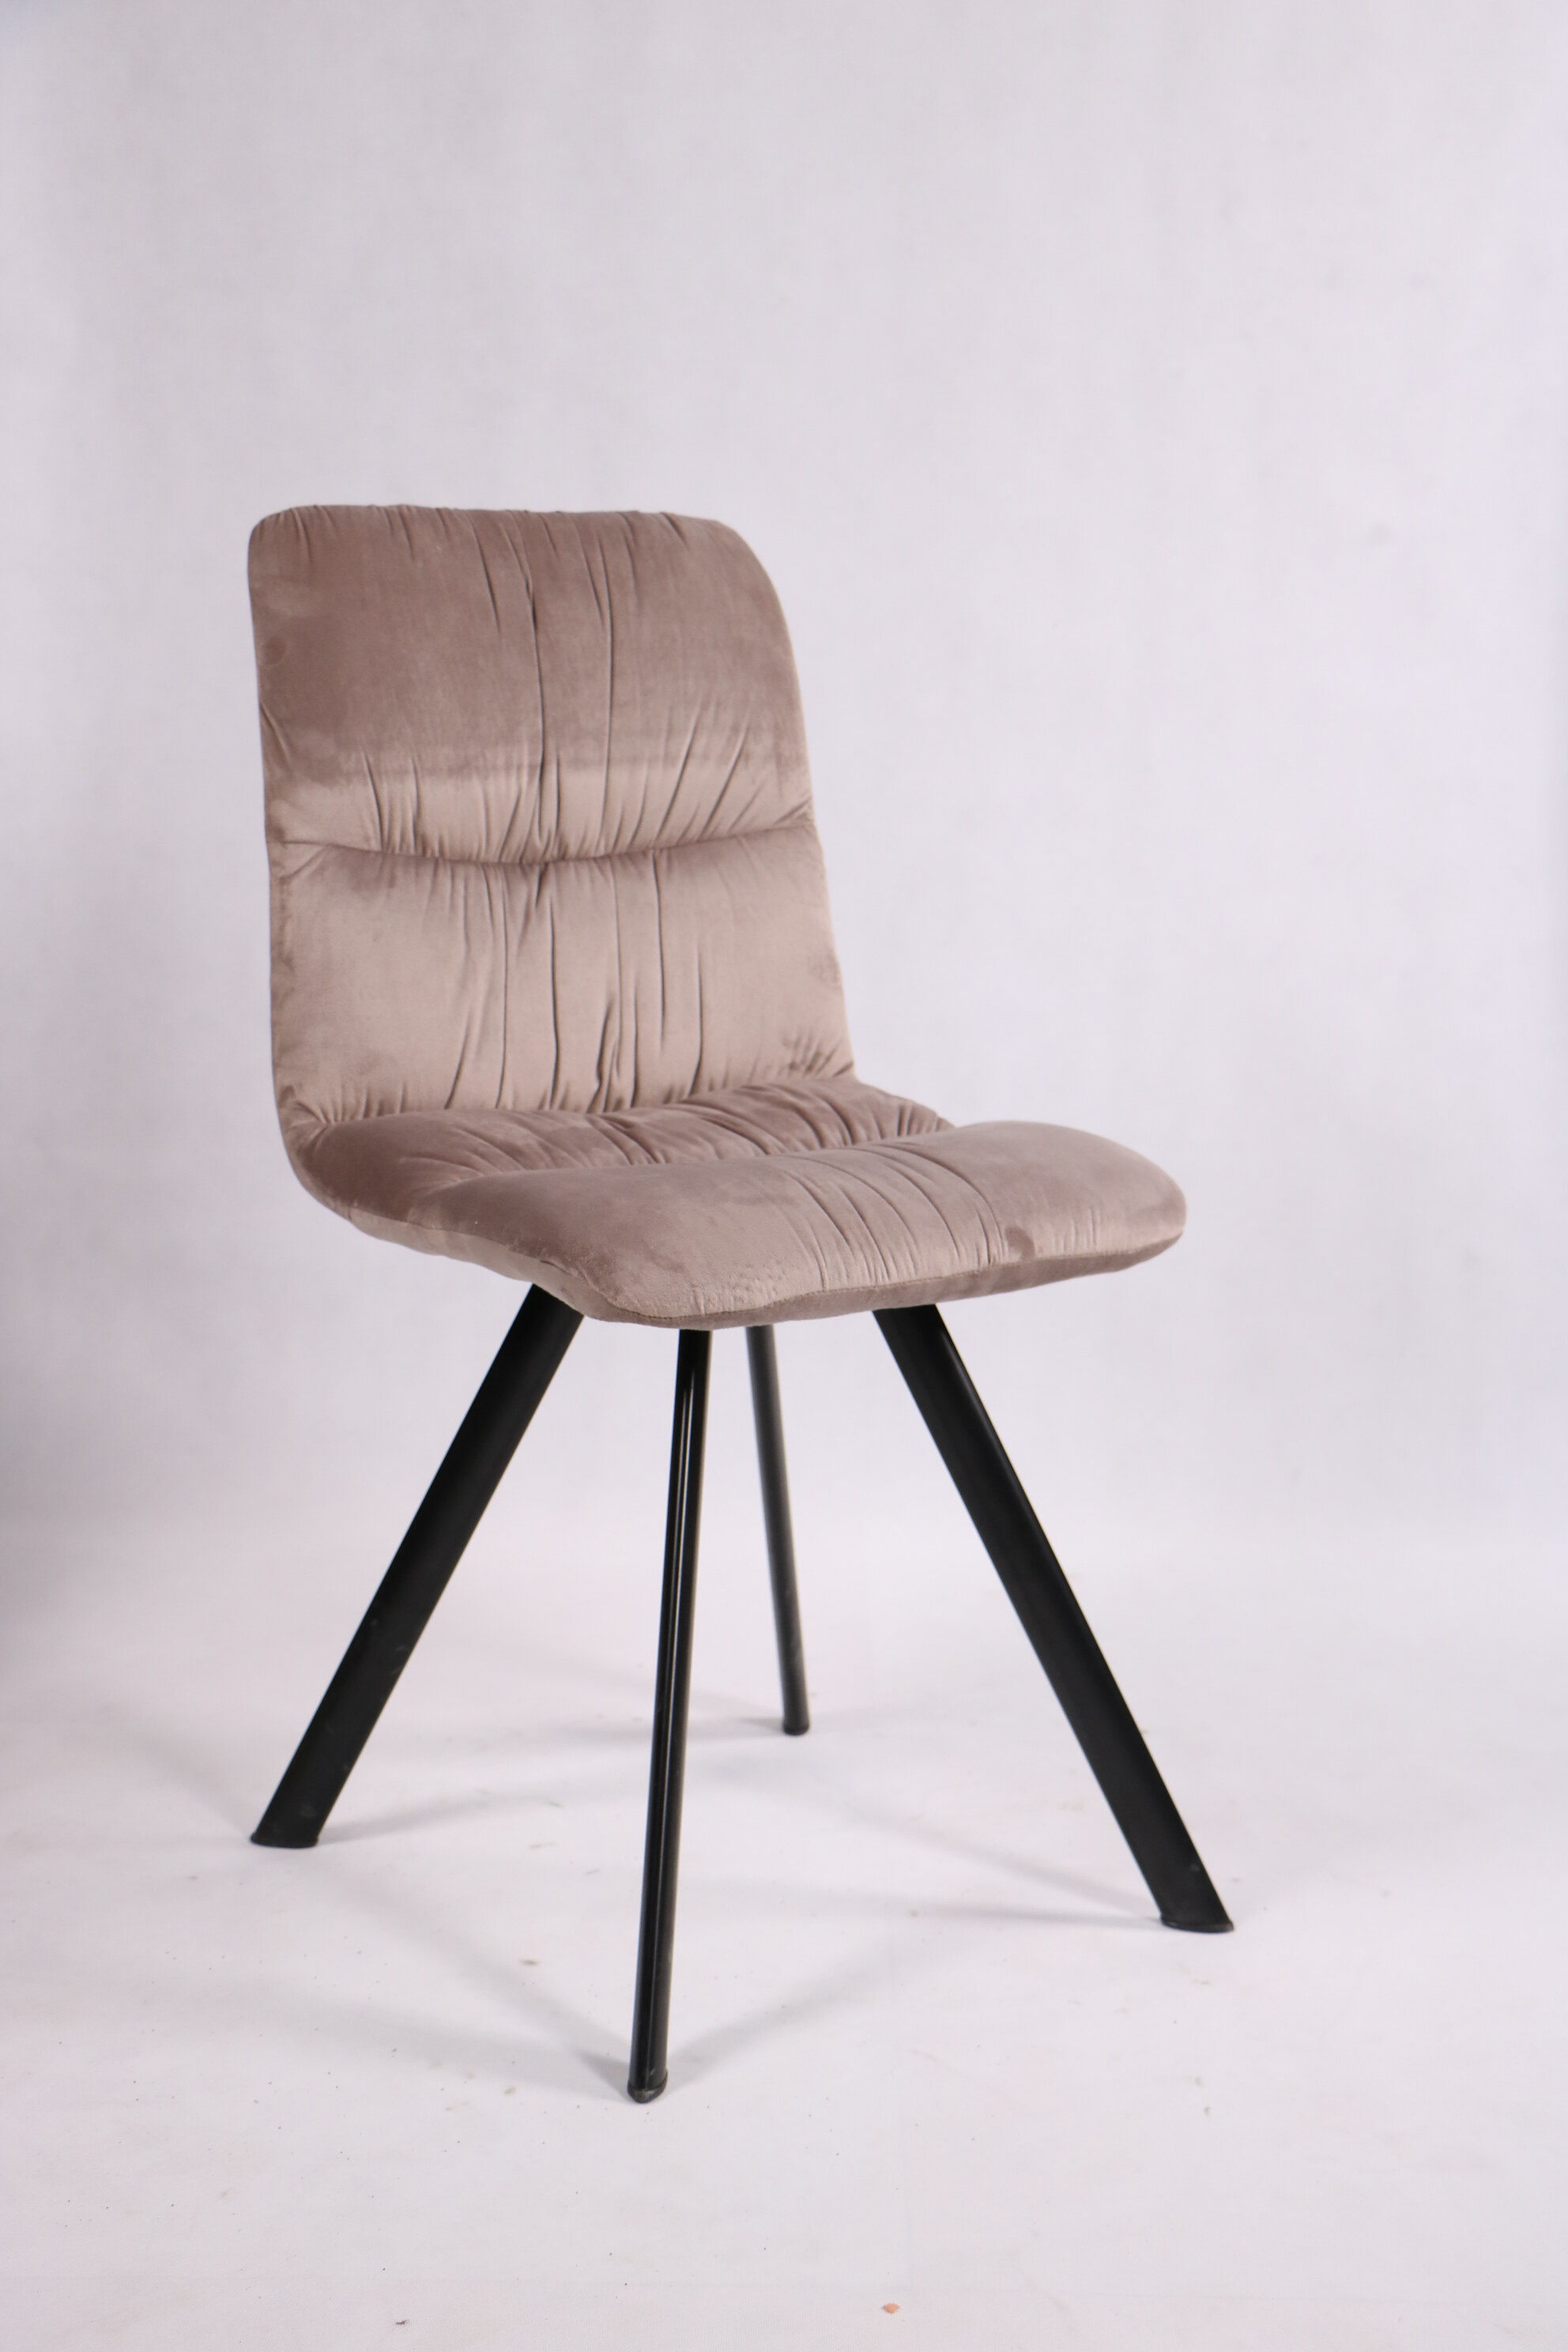 china dining chair suppliers, china dining chair manufacturers